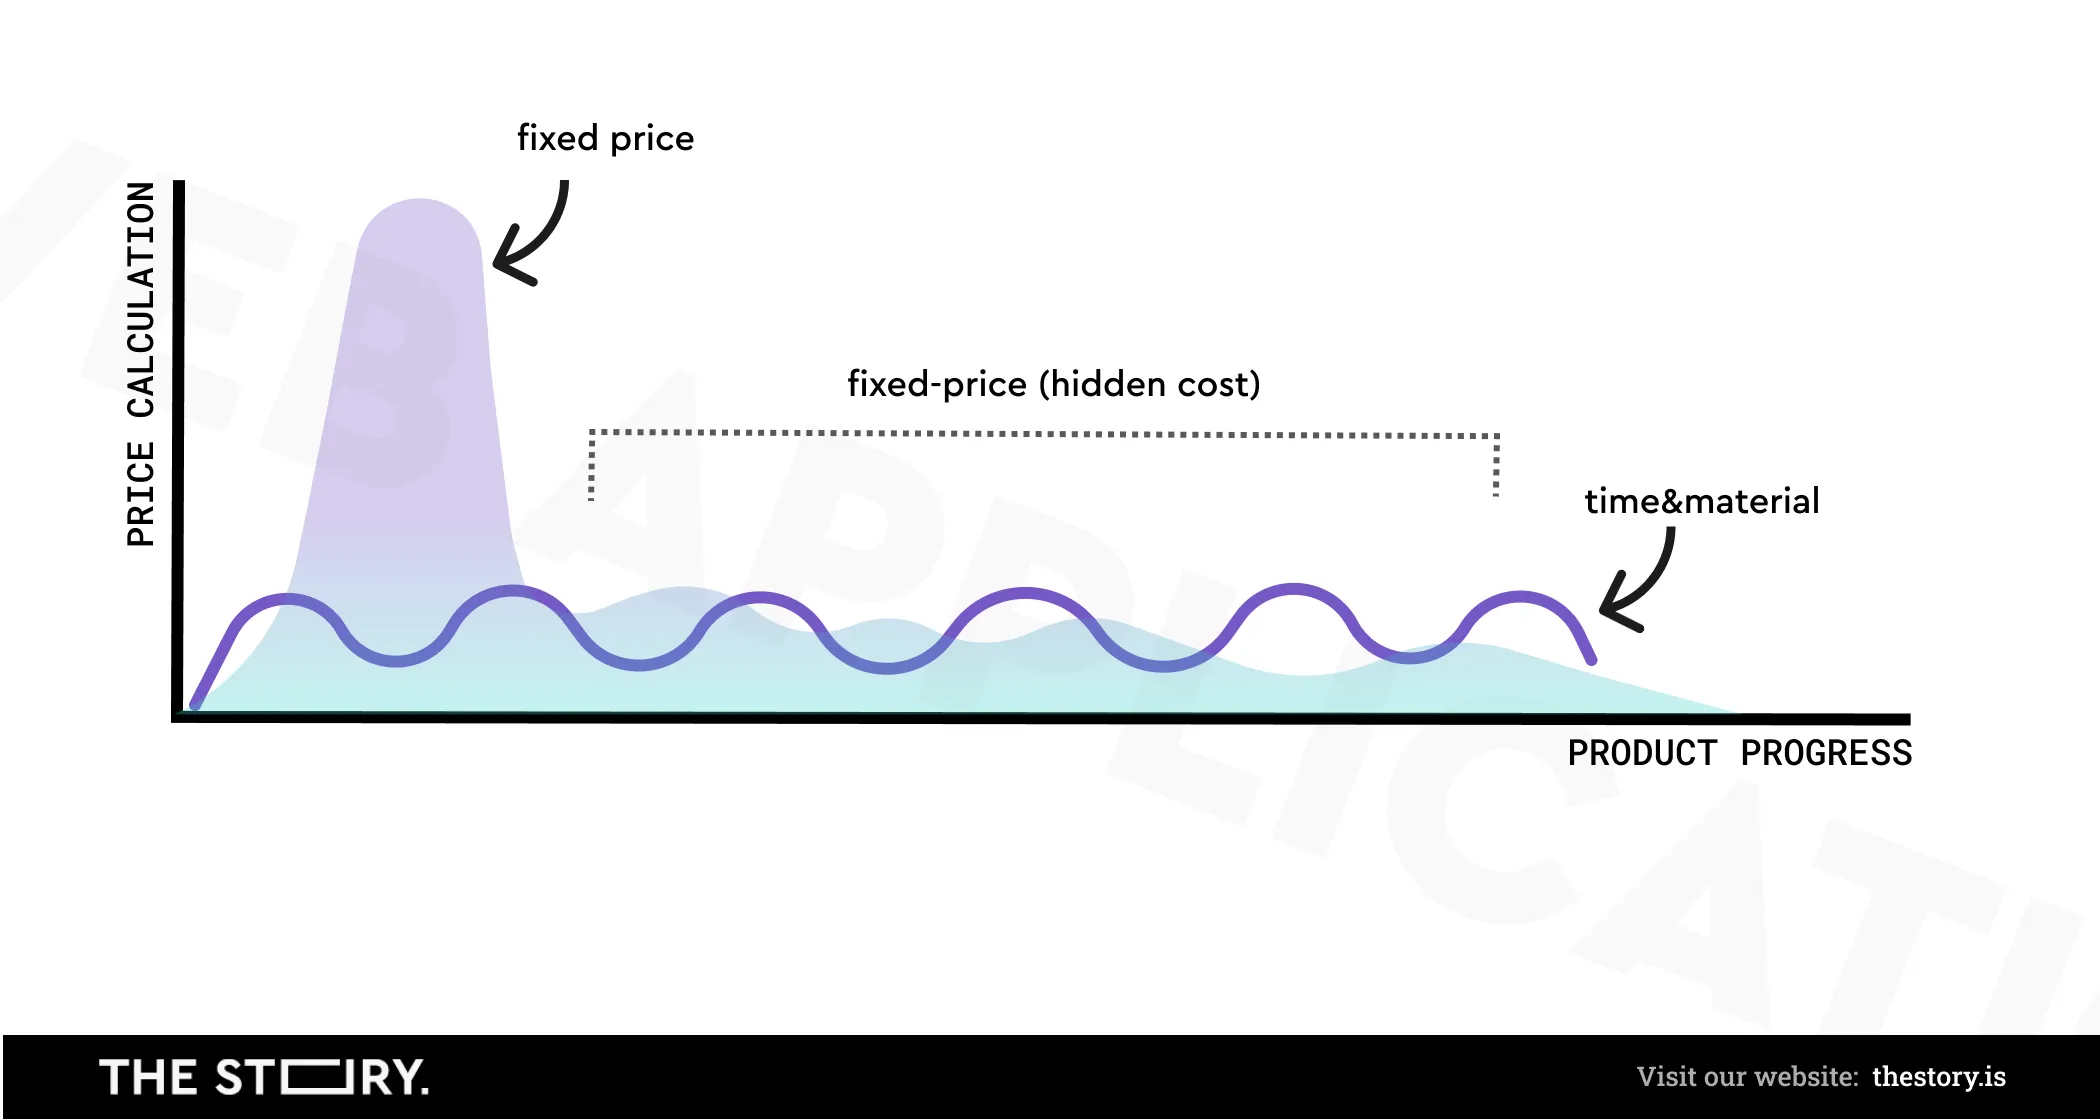 Chart presenting the comparison of costs between a fixed price and time & material